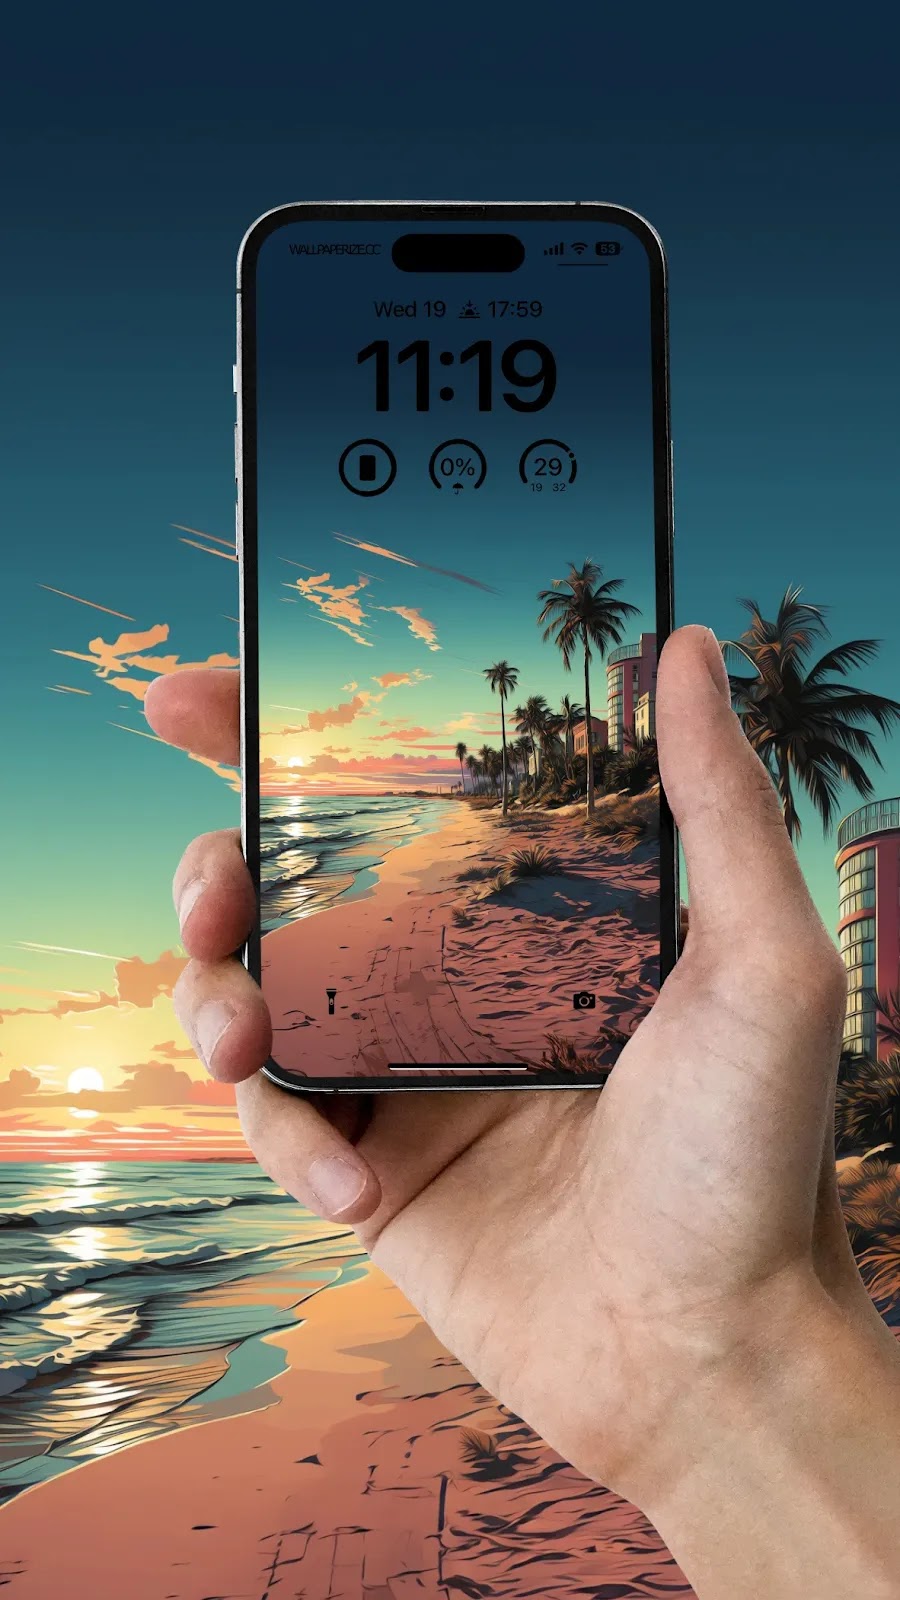 Hand holding a iphone with a serene beach sunset wallpaper.

